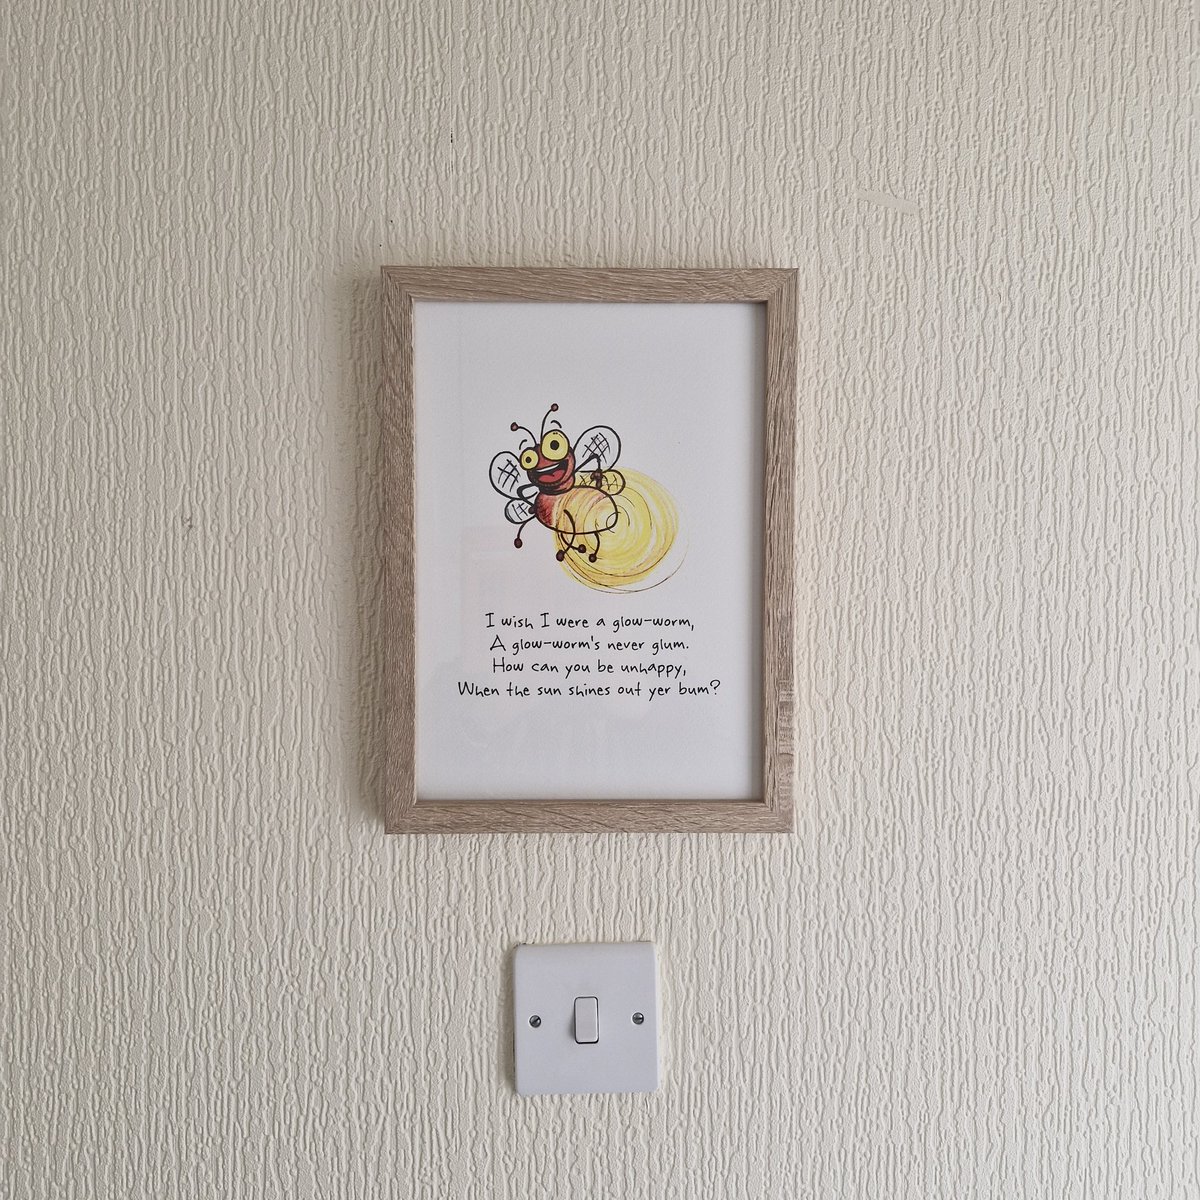 My @gingertotty artwork is now up. Right above the morning light switch to give me a glow every morning. You can get your own piece of motivational (or sweary) artwork from @dippyfishcards and she even does commission and cards too. #MHHSBD #ElevensesHour